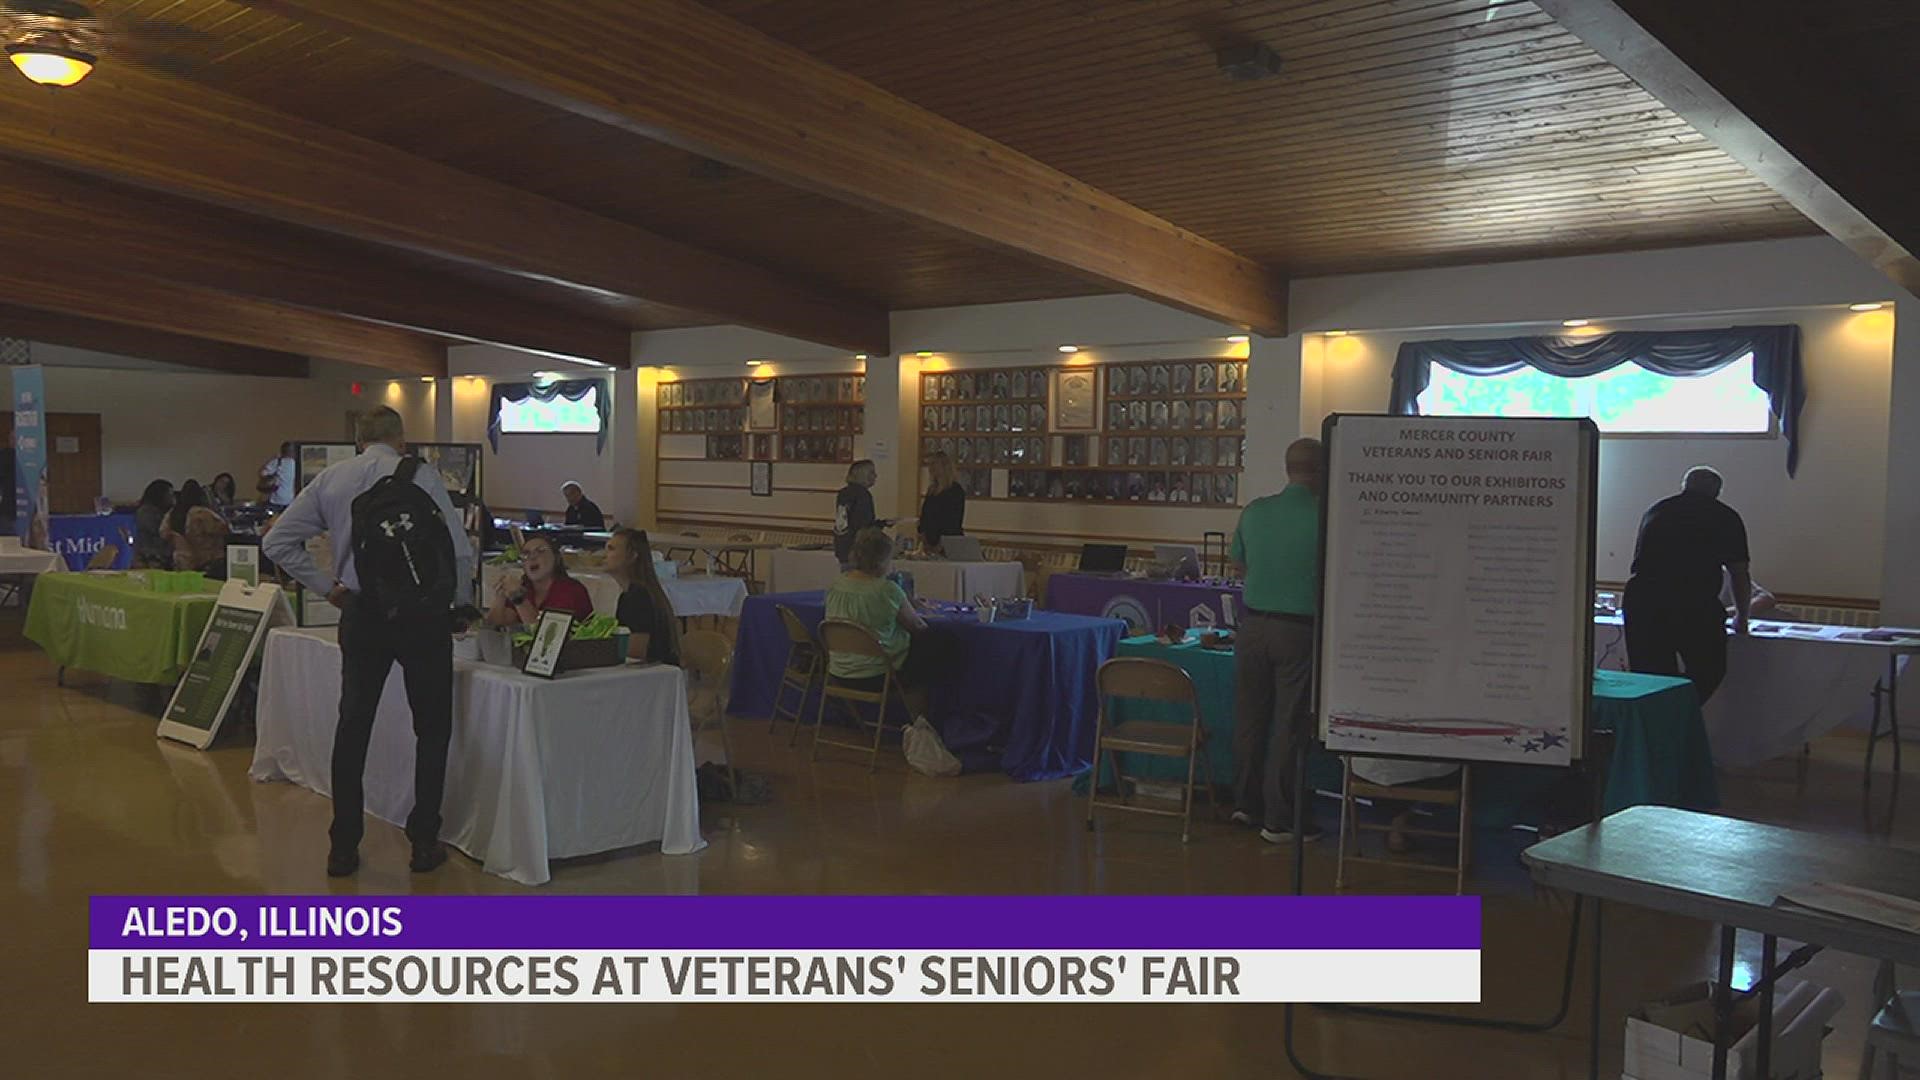 The week-long traveling fair aims to connect senior and veteran communities with local resources.